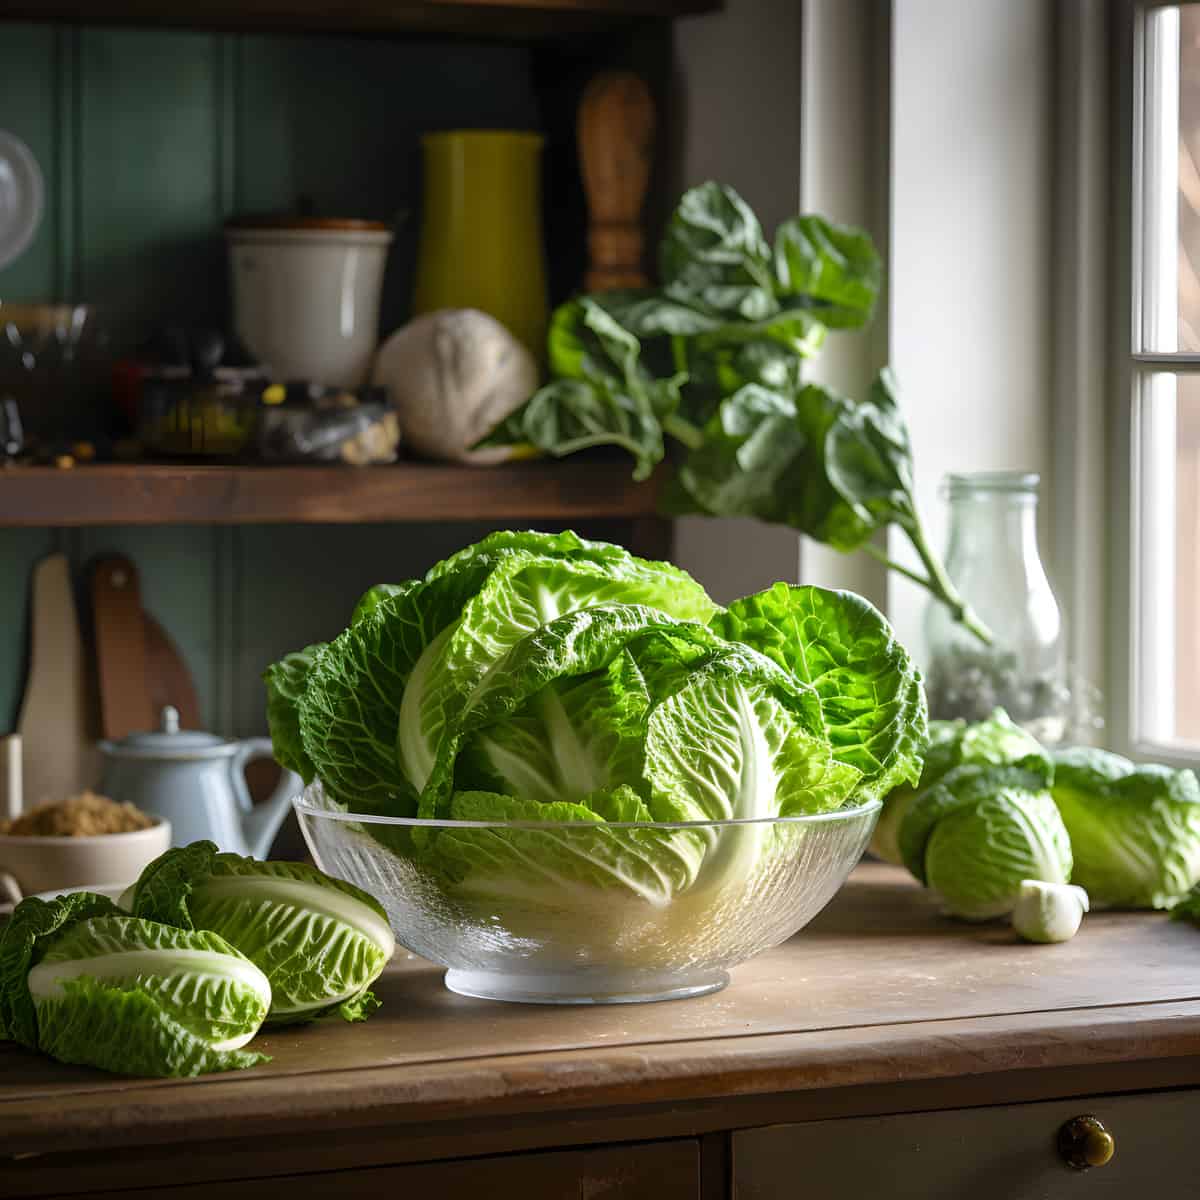 Spring Cabbage on a kitchen counter